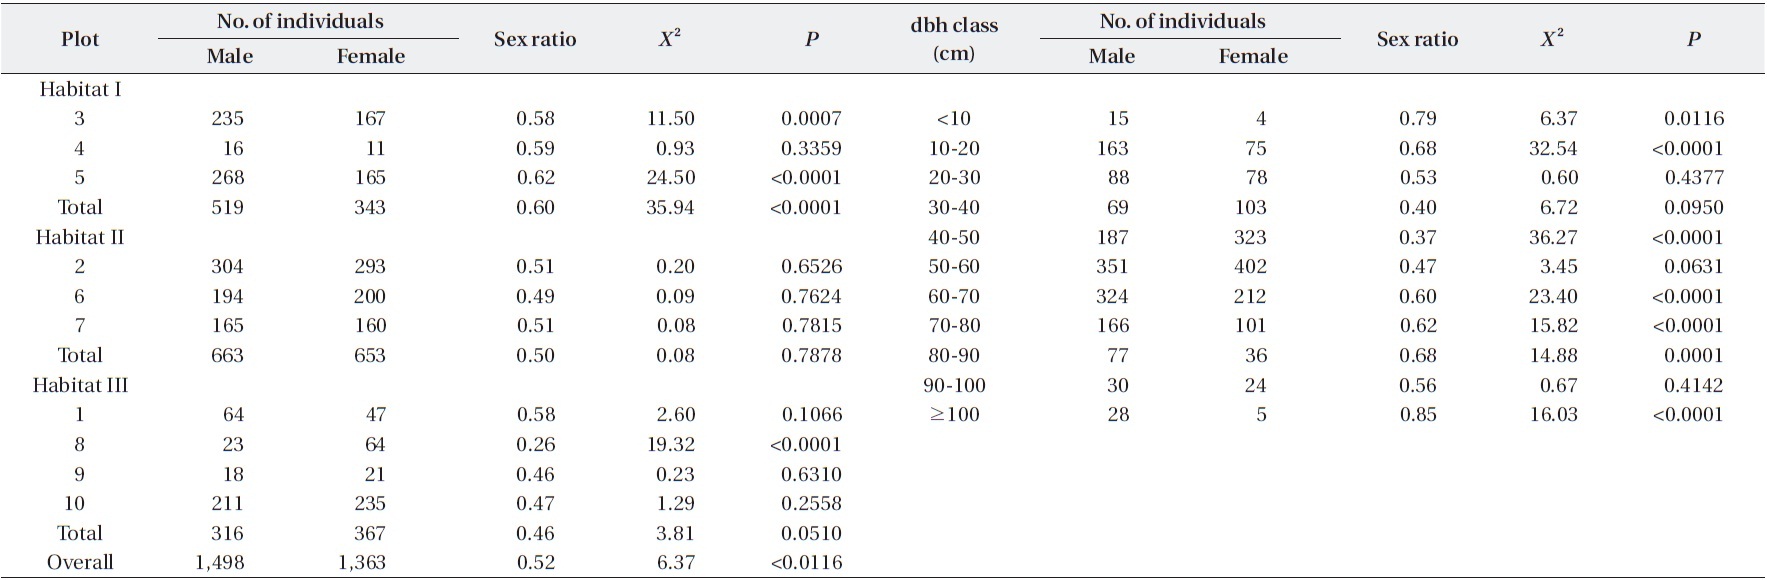 Numbers and sex ratios of male and female trees among plots and dbh classes of Torreya nucifera trees in Jeju Island